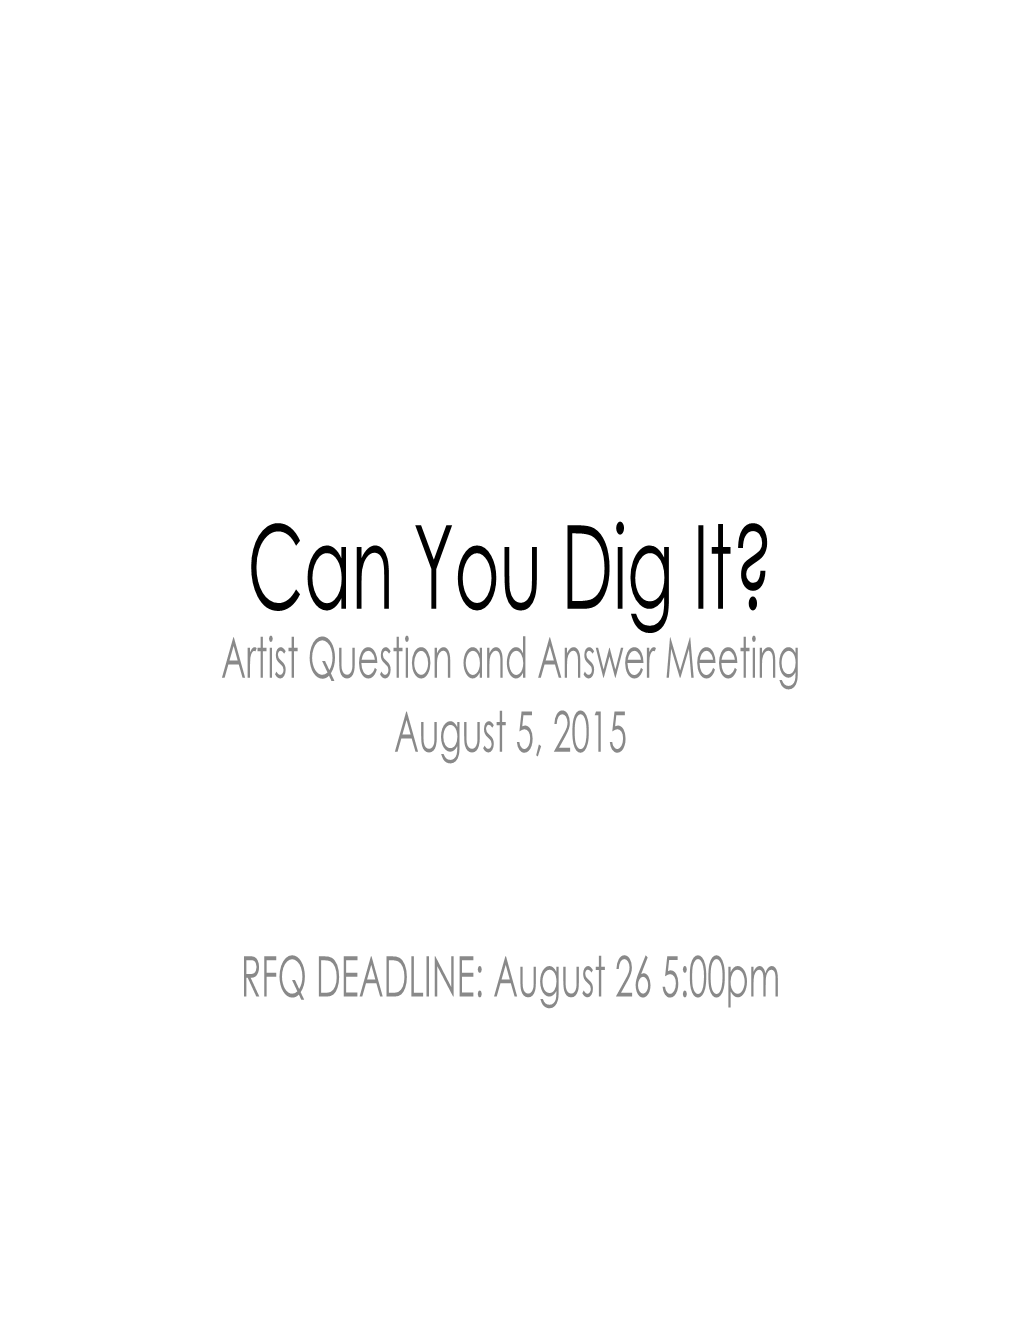 Can You Dig It? Artist Question and Answer Meeting August 5, 2015